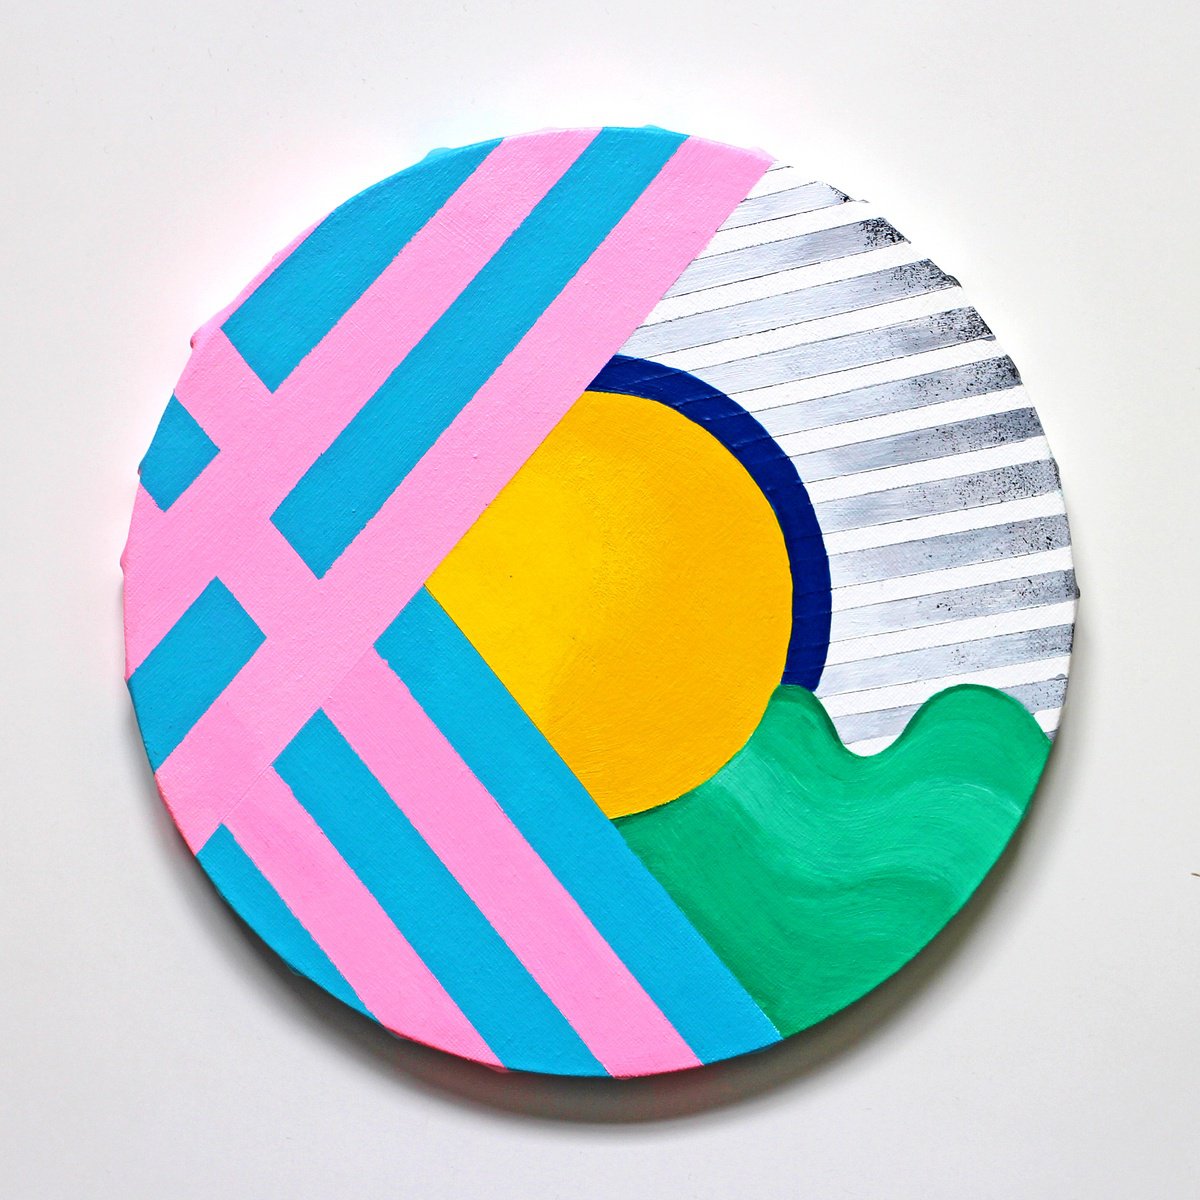 Abstract Circle #1 Painting on Round Canvas by Ian Viggars